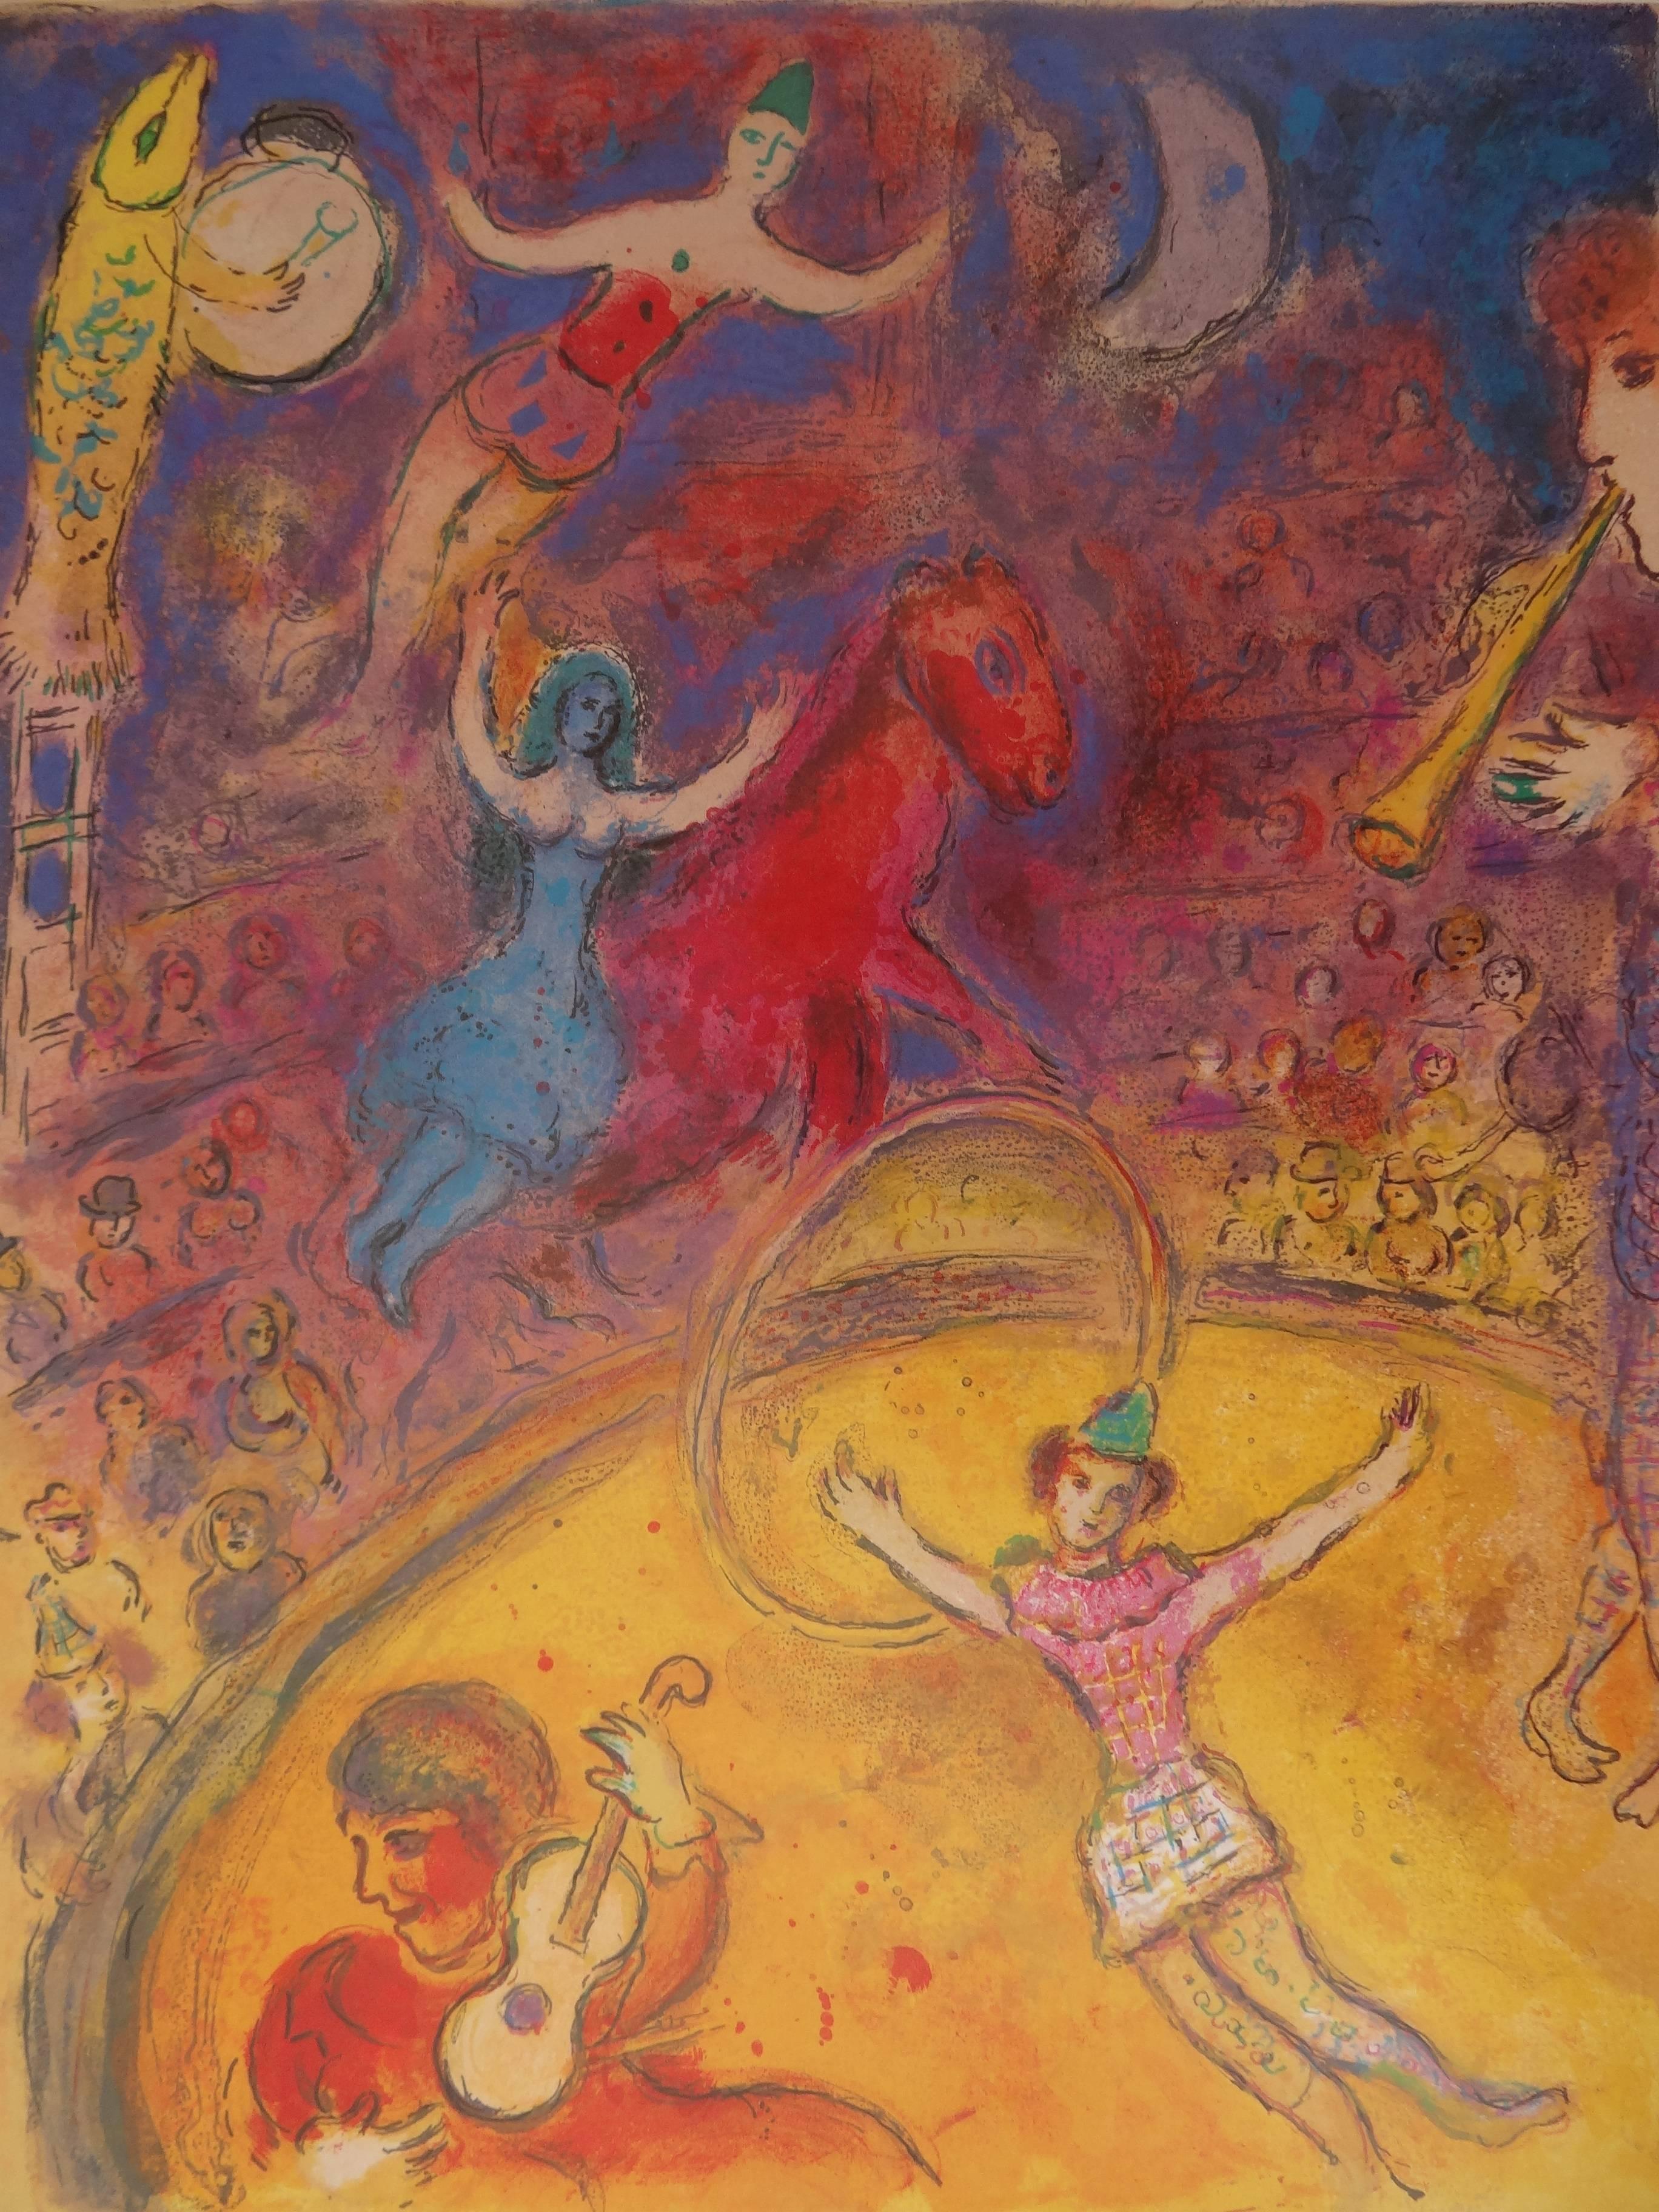 Circus - 25 illustrated books - Vintage poster - 1982 - Print by Marc Chagall